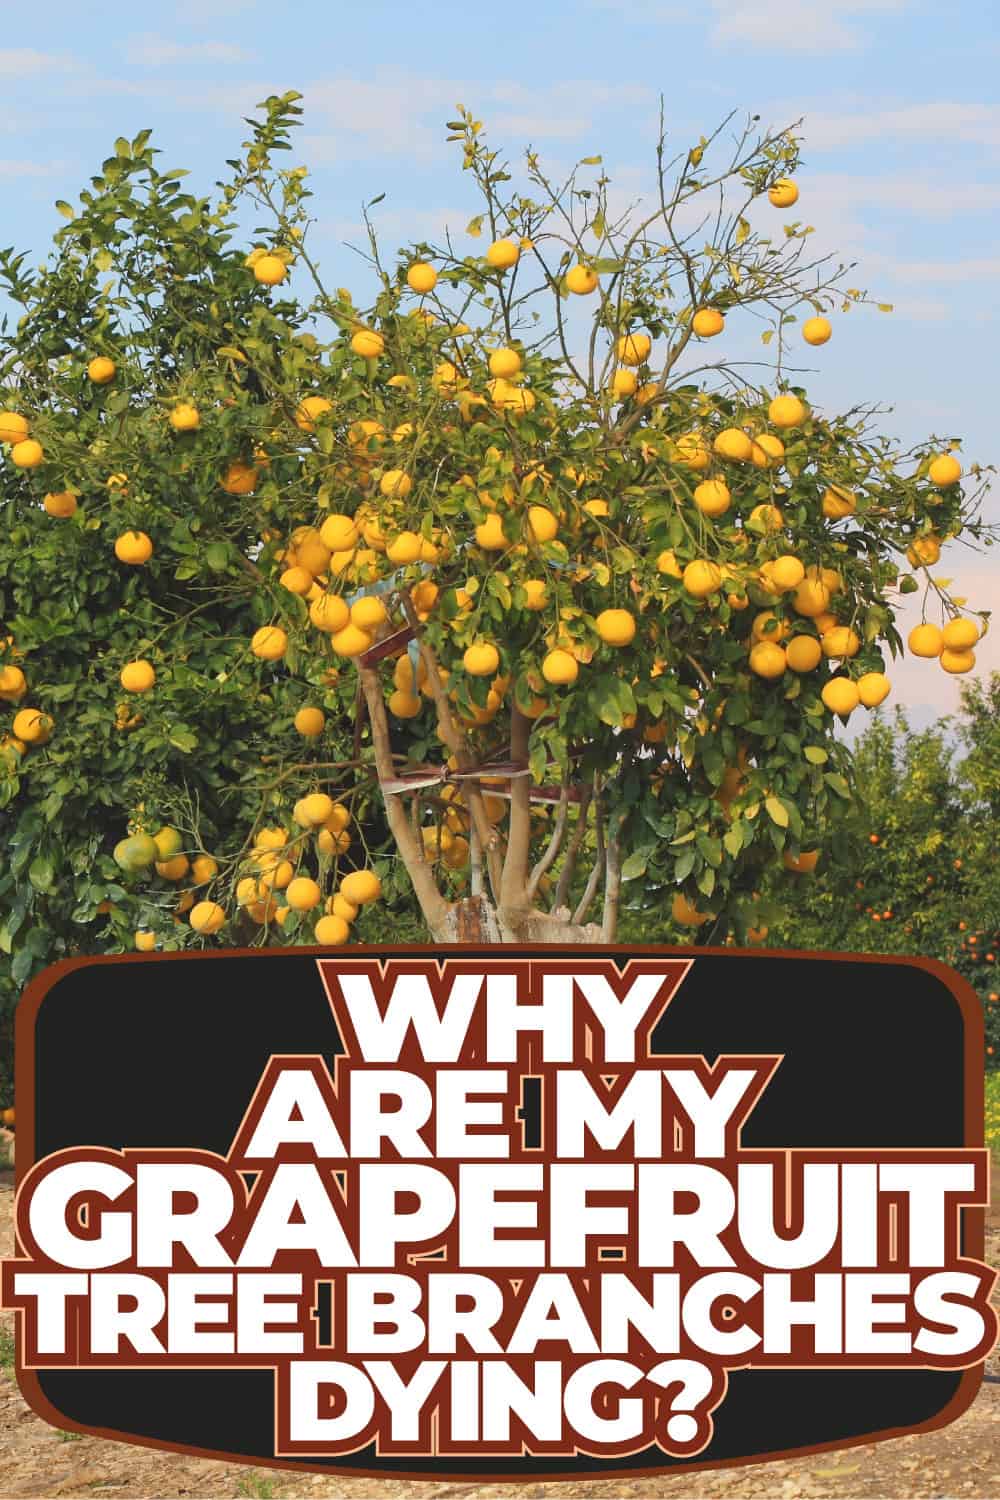 Why Are My Grapefruit Tree Branches Dying?